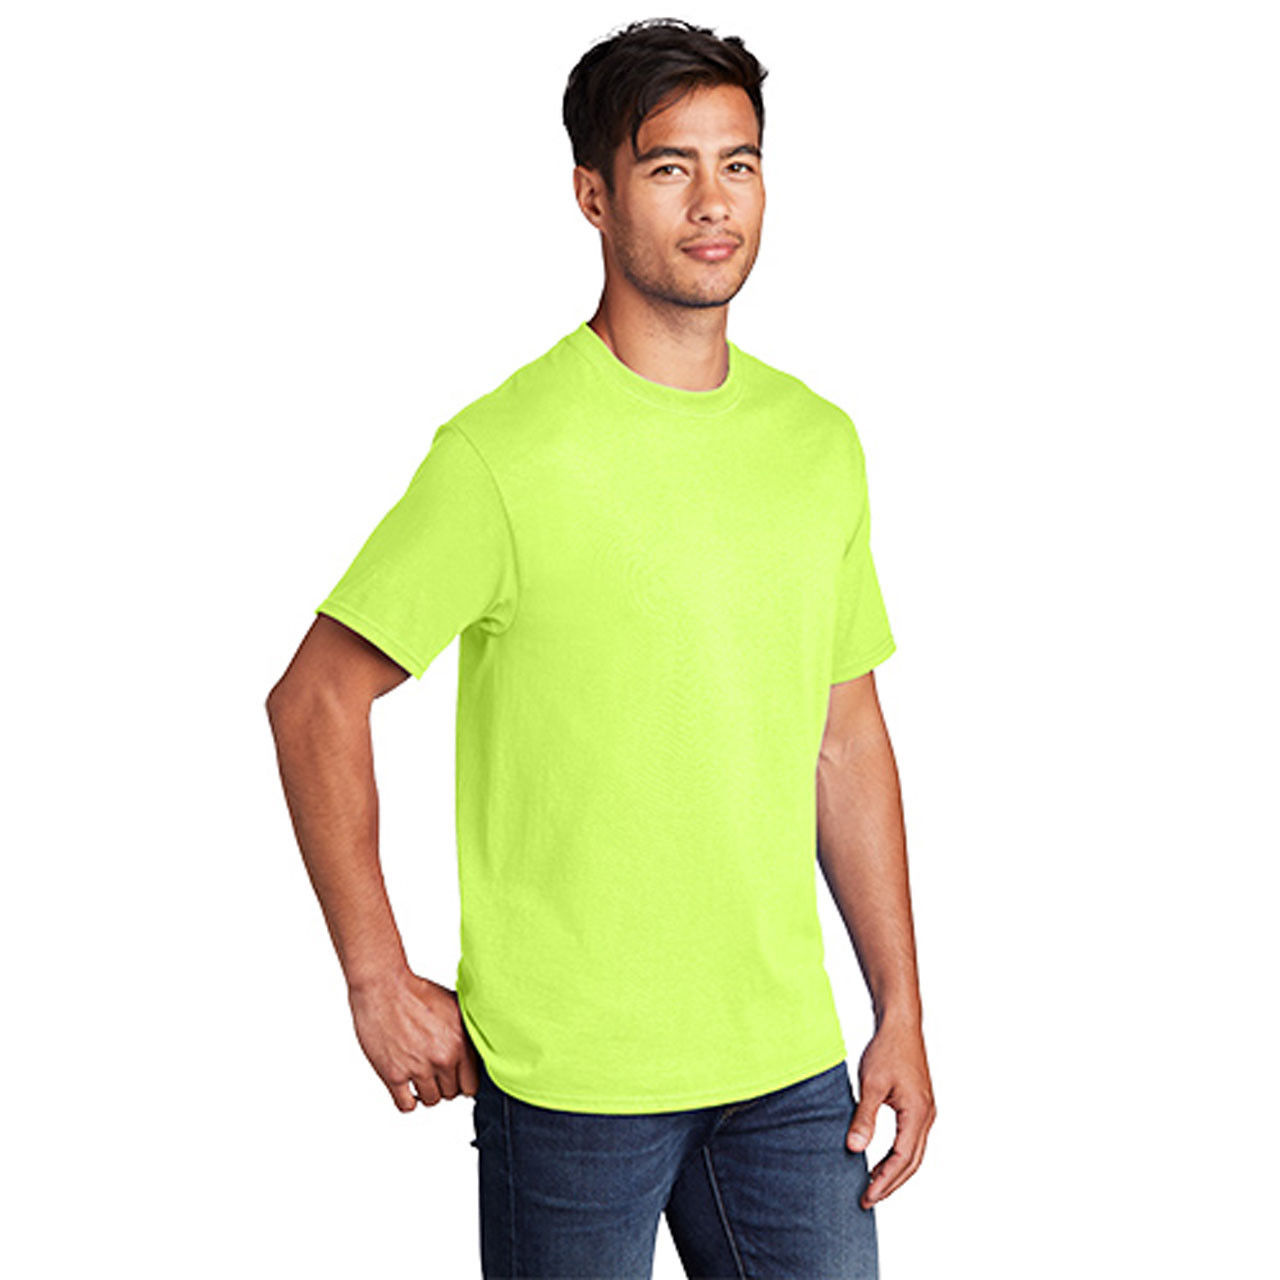 Is the neon color t-shirt suitable for all events?